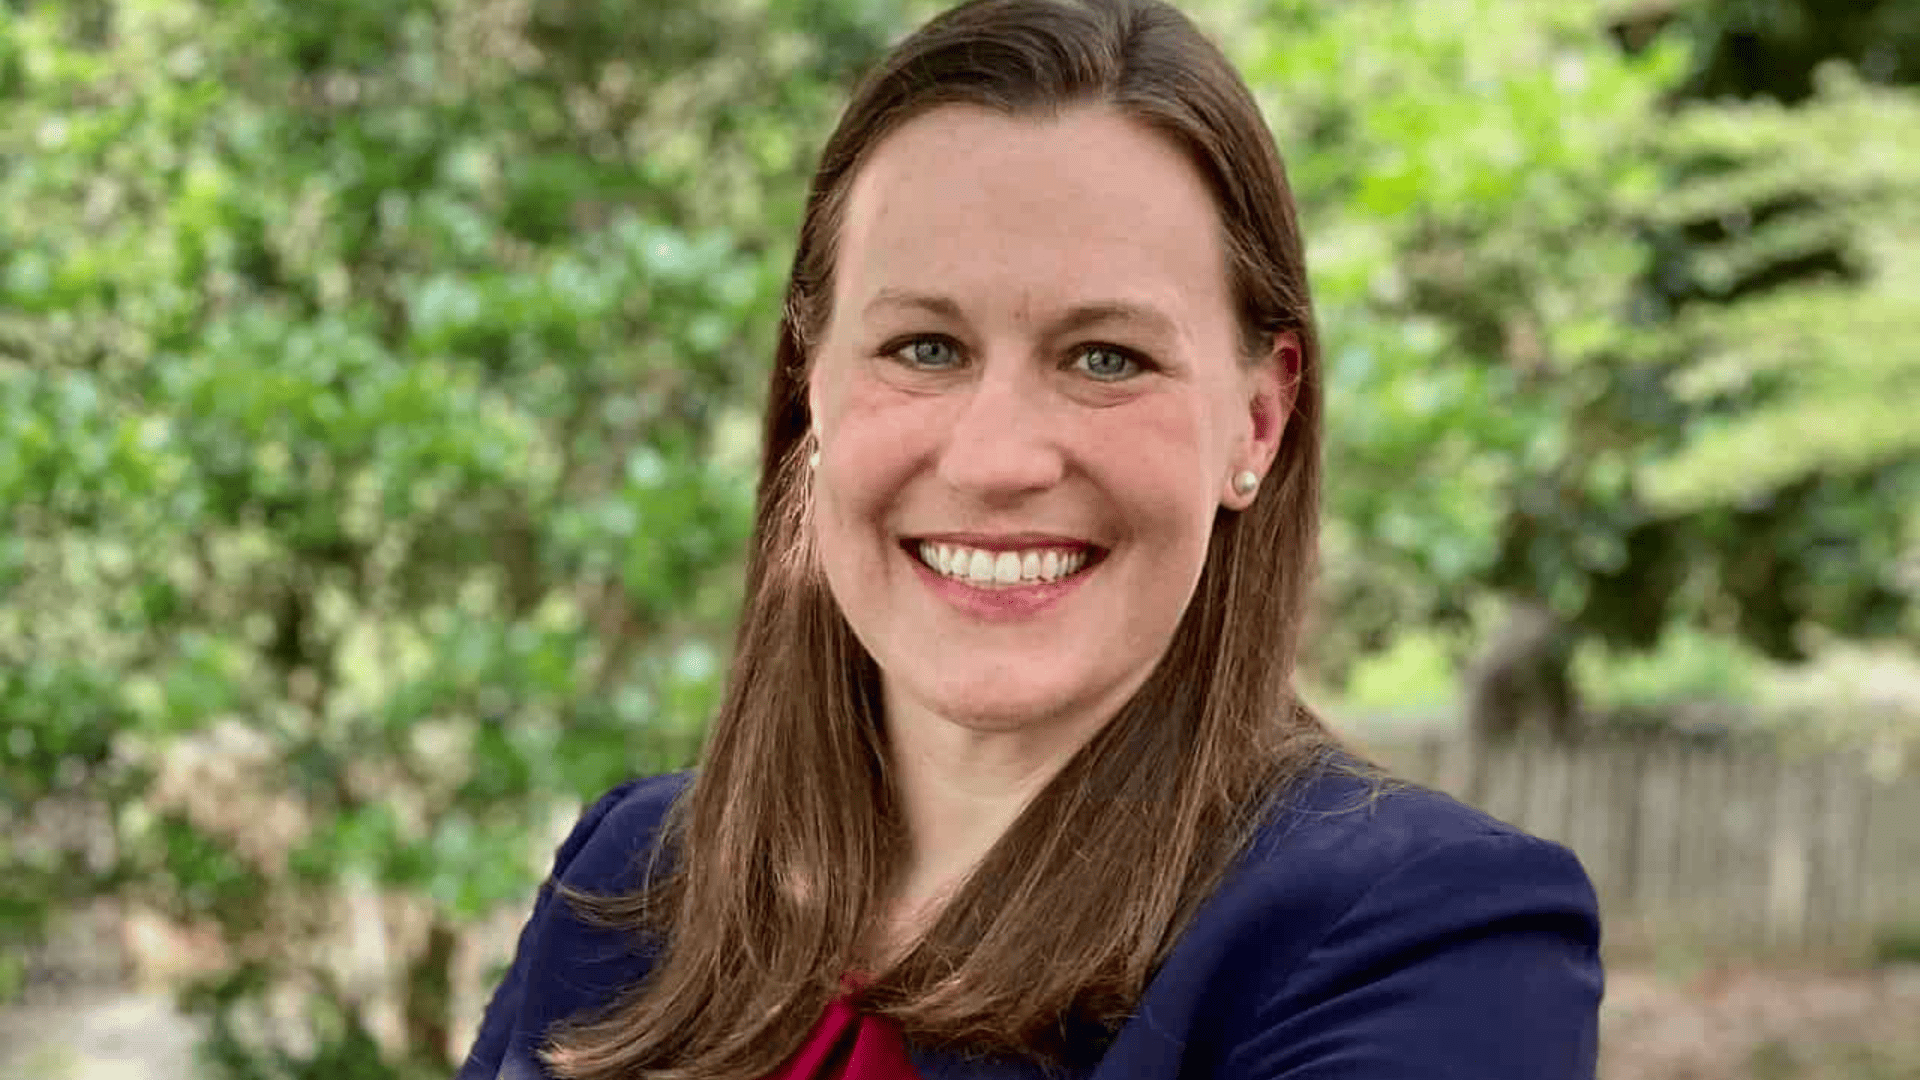 A message from Allison Constance, new Director of Pro Bono Programs